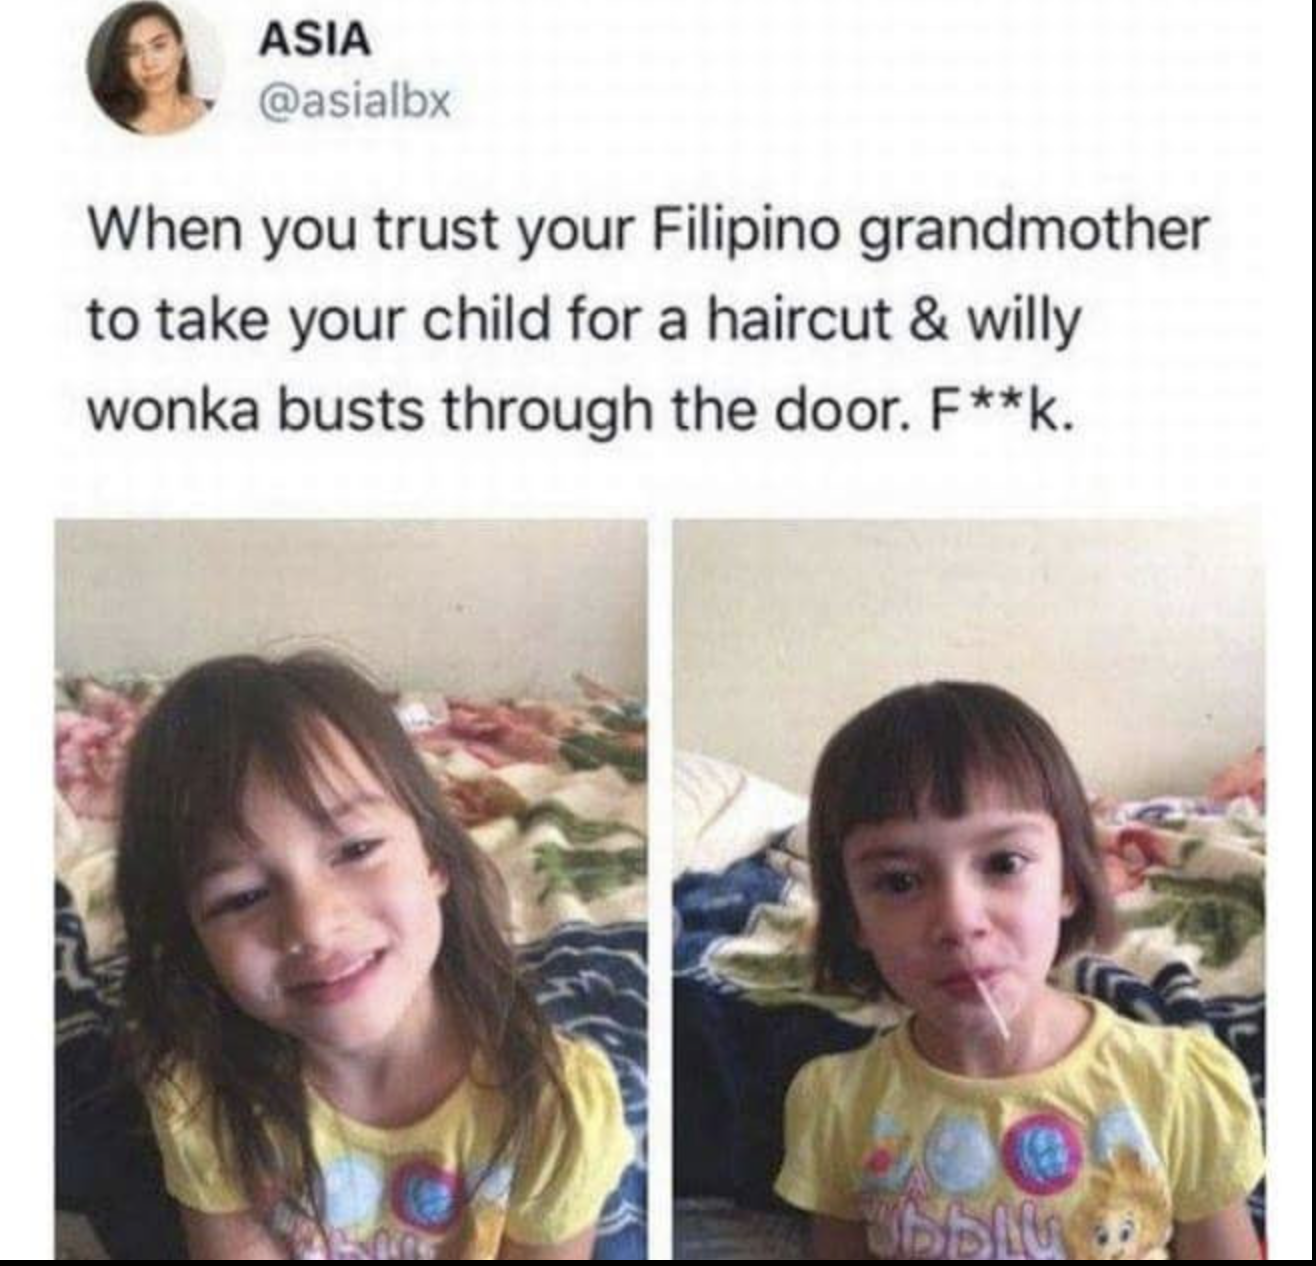 willy wonka haircut meme - Asia When you trust your Filipino grandmother to take your child for a haircut & willy wonka busts through the door. Fk.